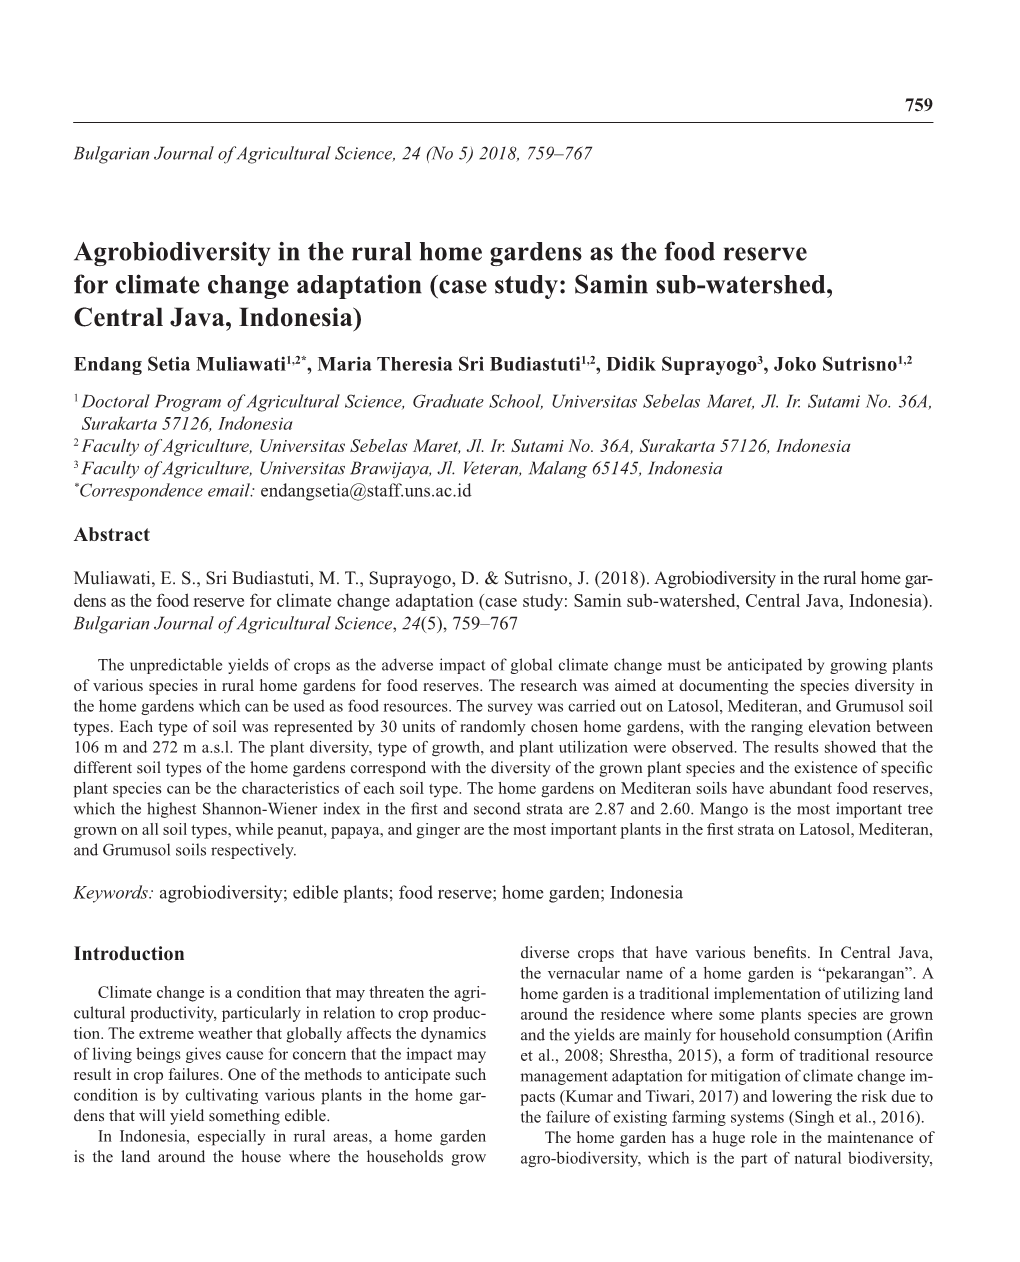 Agrobiodiversity in the Rural Home Gardens As the Food Reserve for Climate Change Adaptation (Case Study: Samin Sub-Watershed, Central Java, Indonesia)